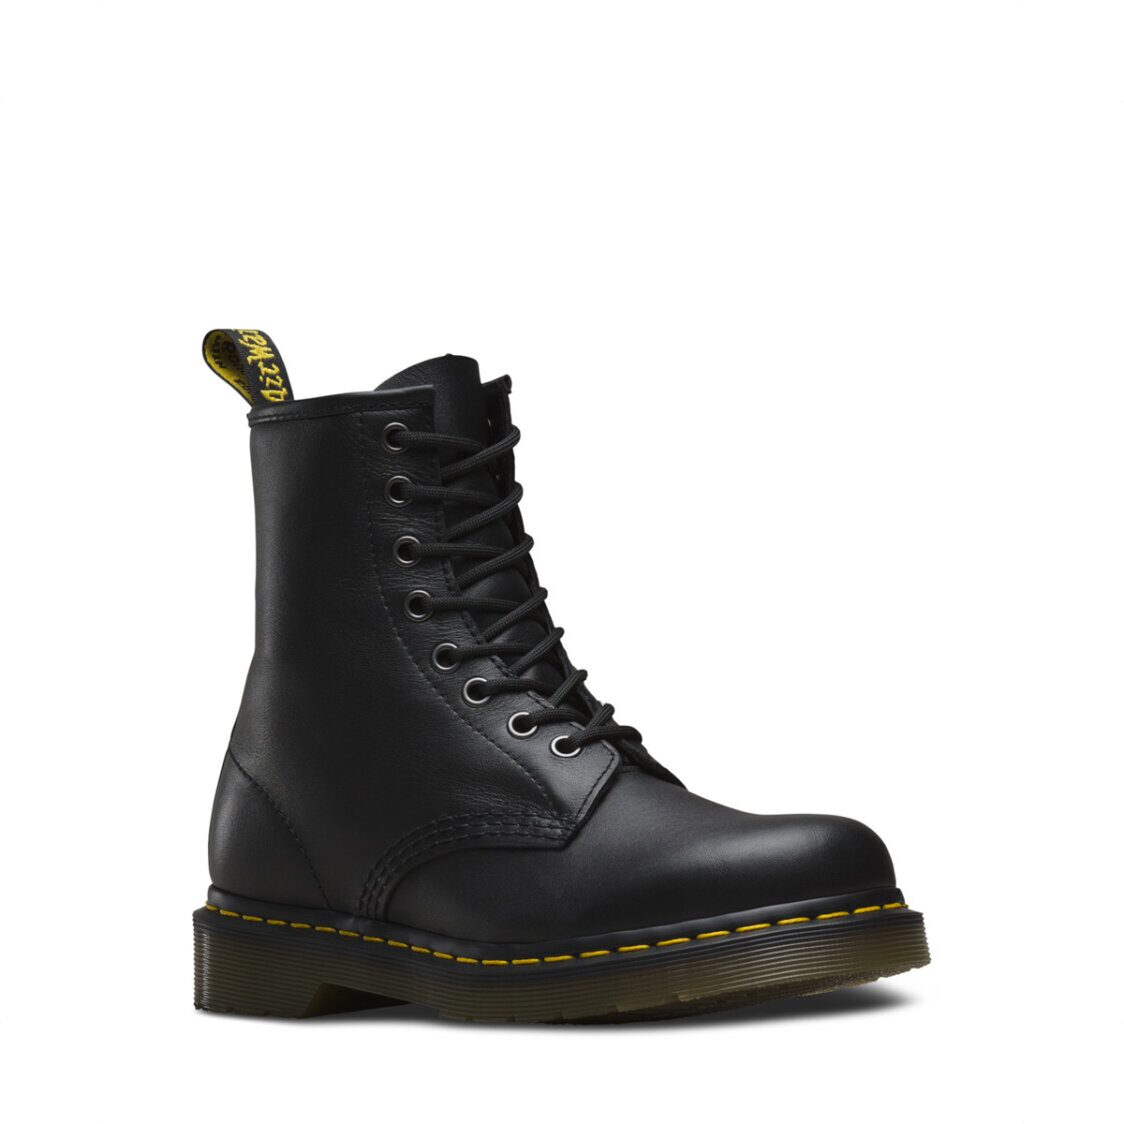 dr martens store locations